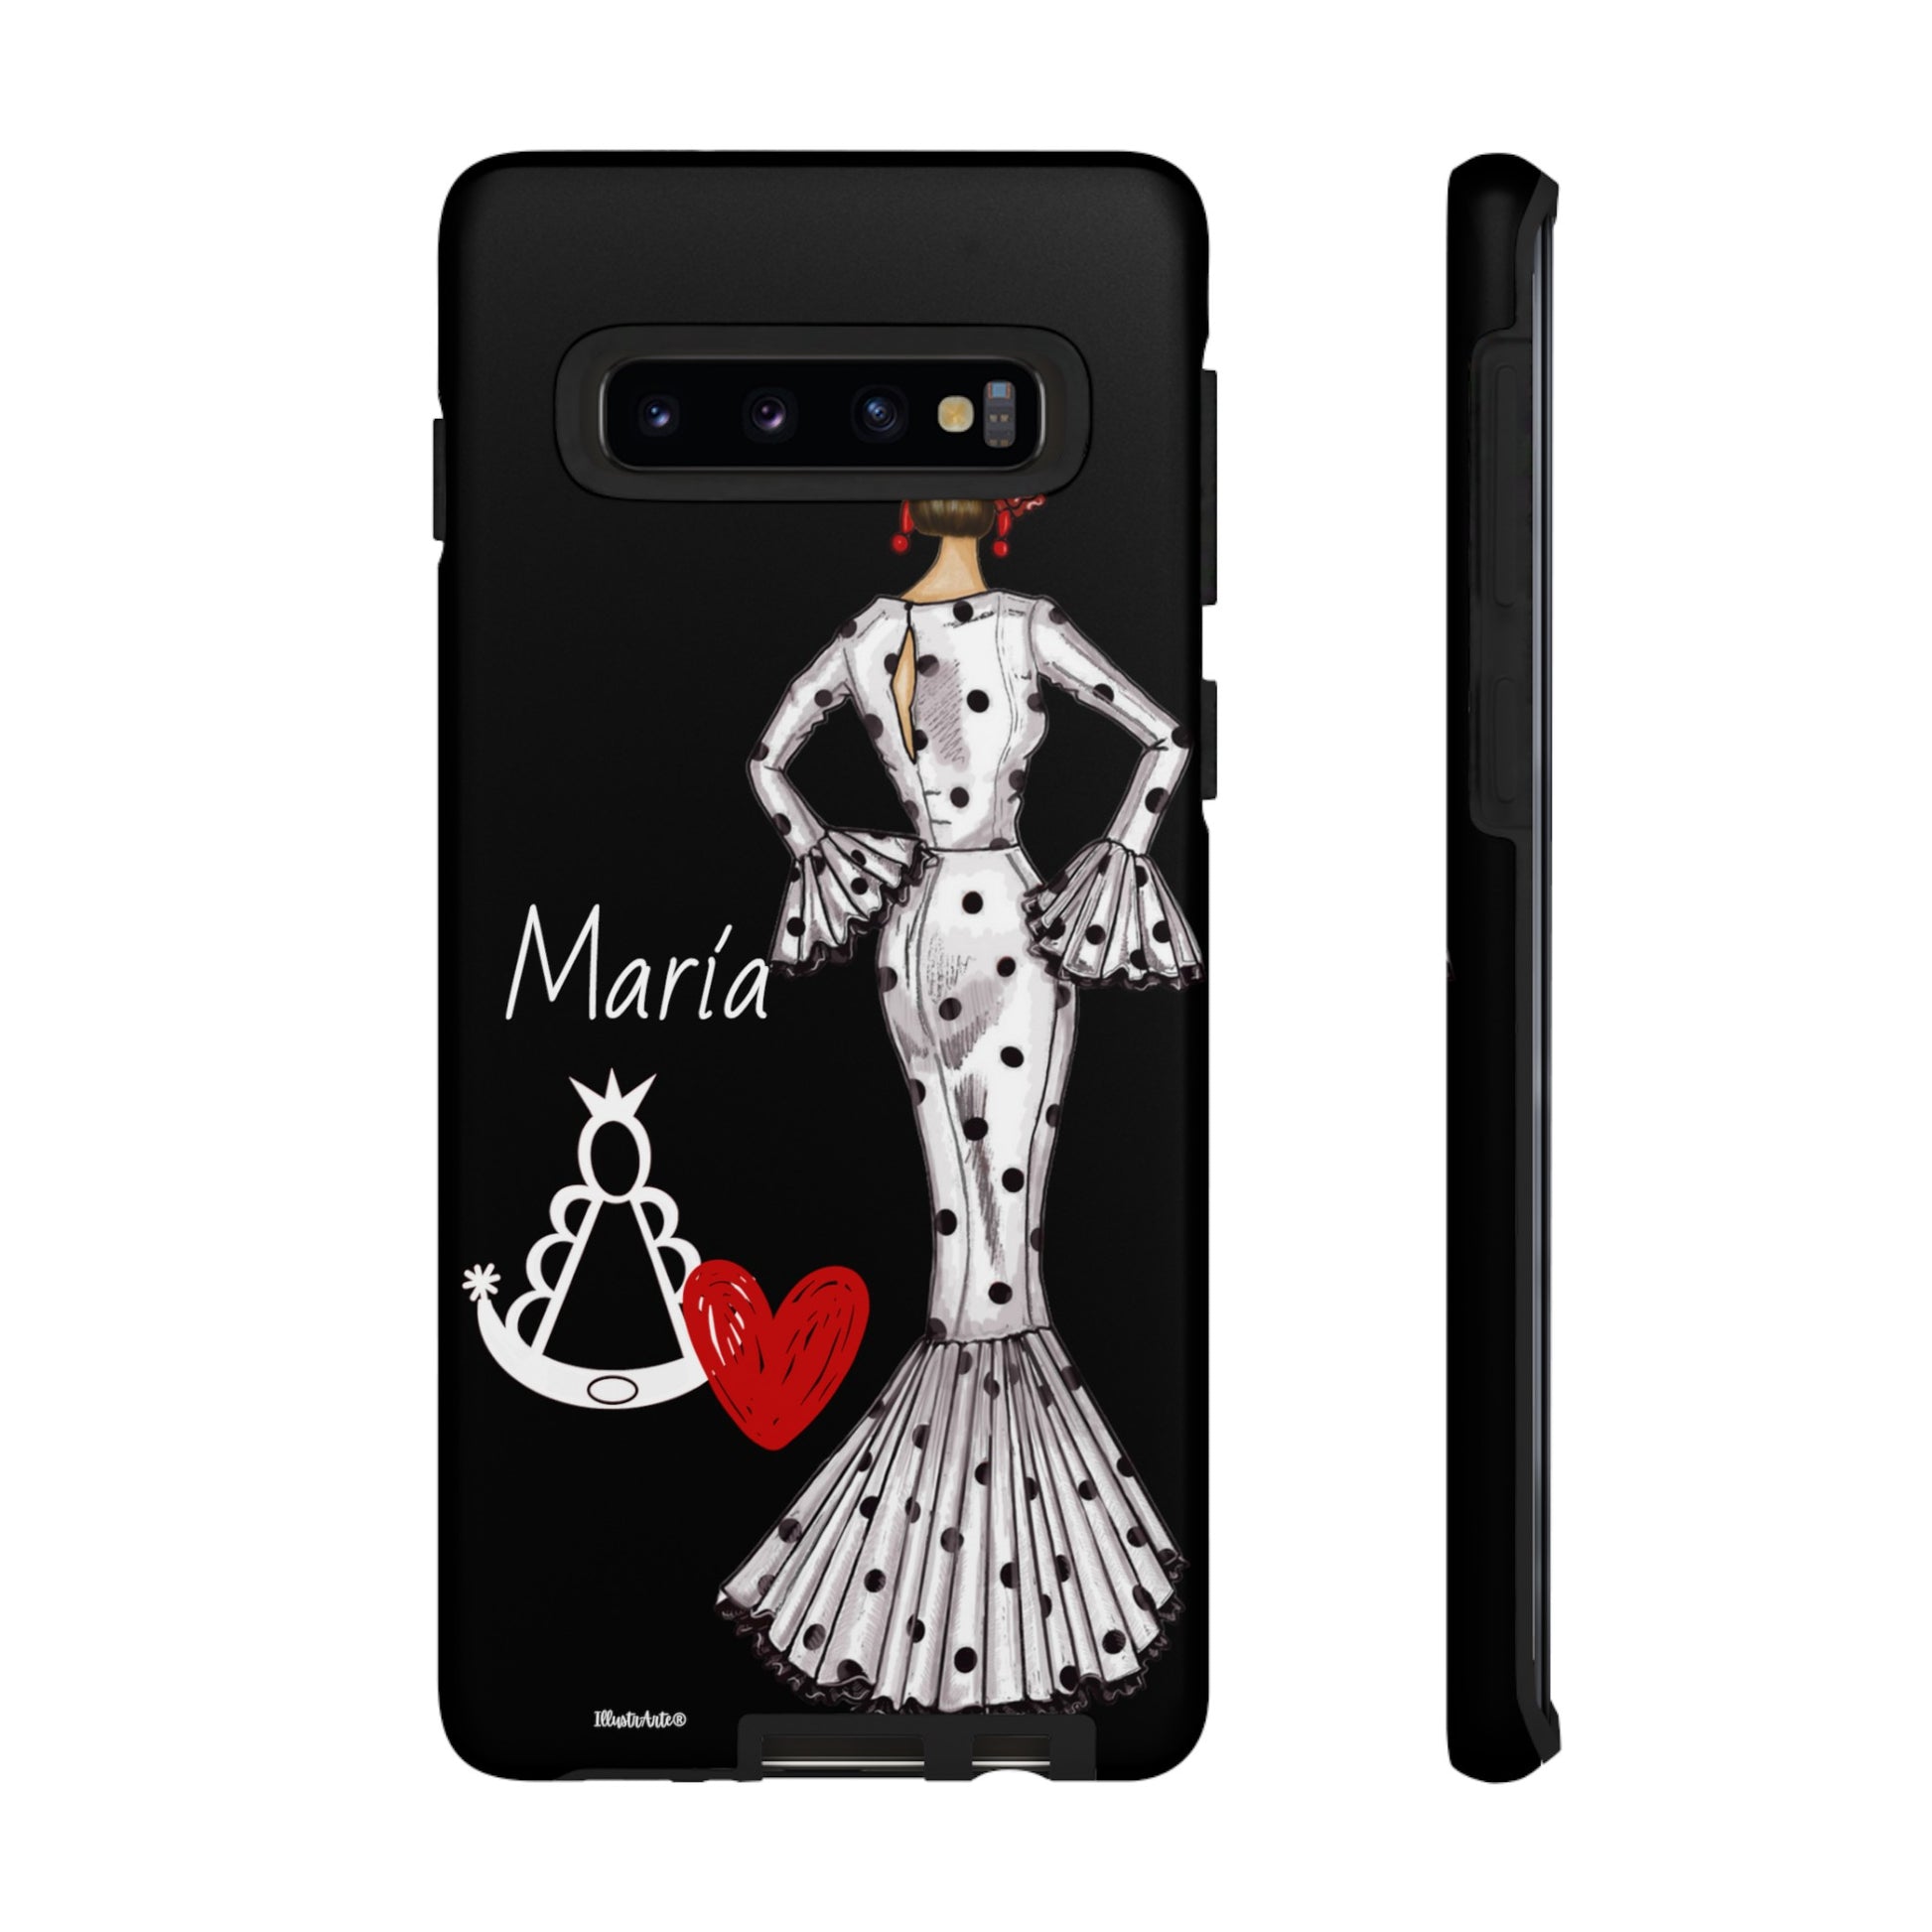 a phone case with a lady in a polka dot dress